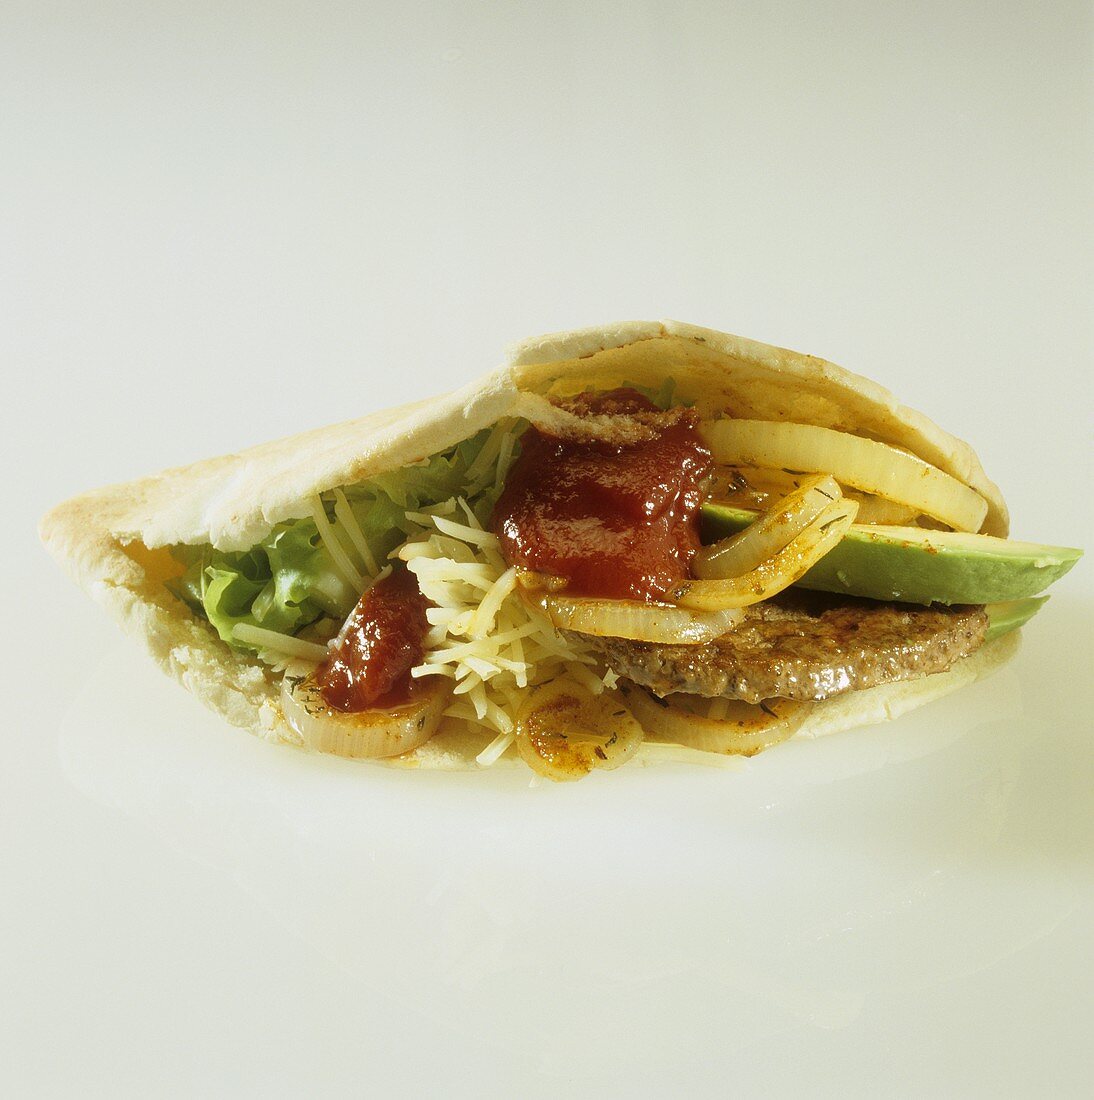 Taco filled with burger and avocado